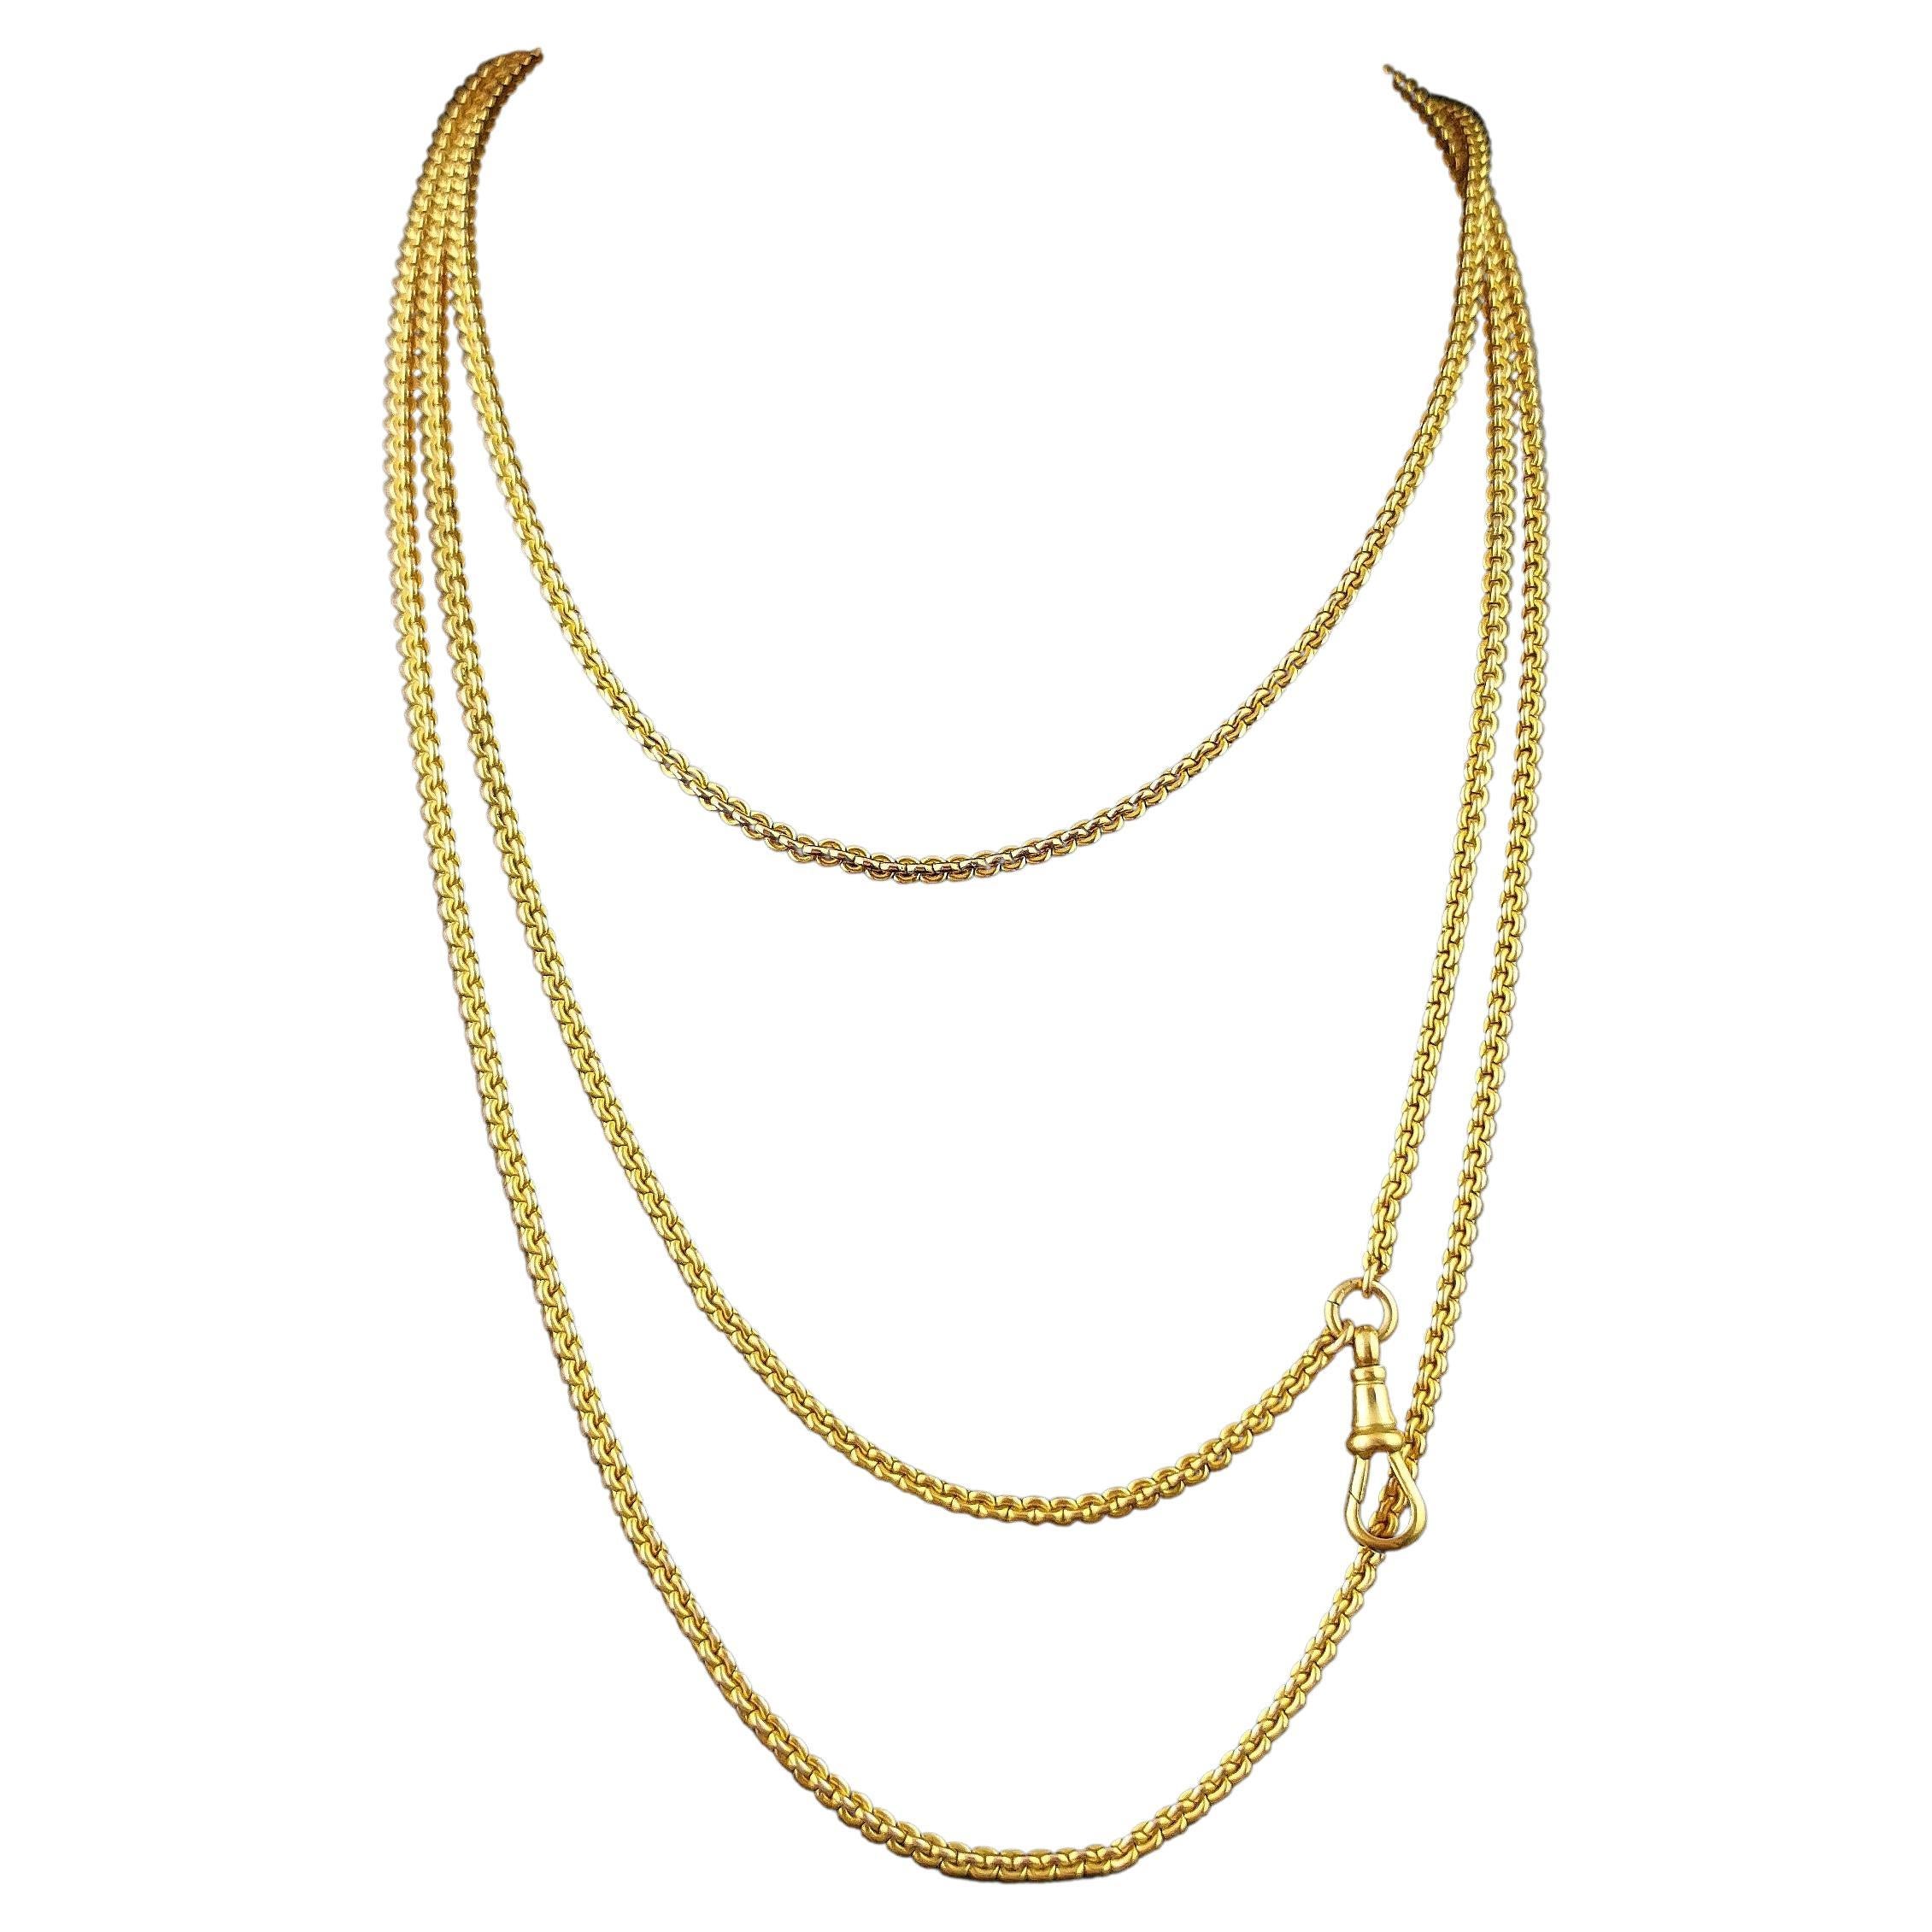 Pinchbeck Chain Necklaces